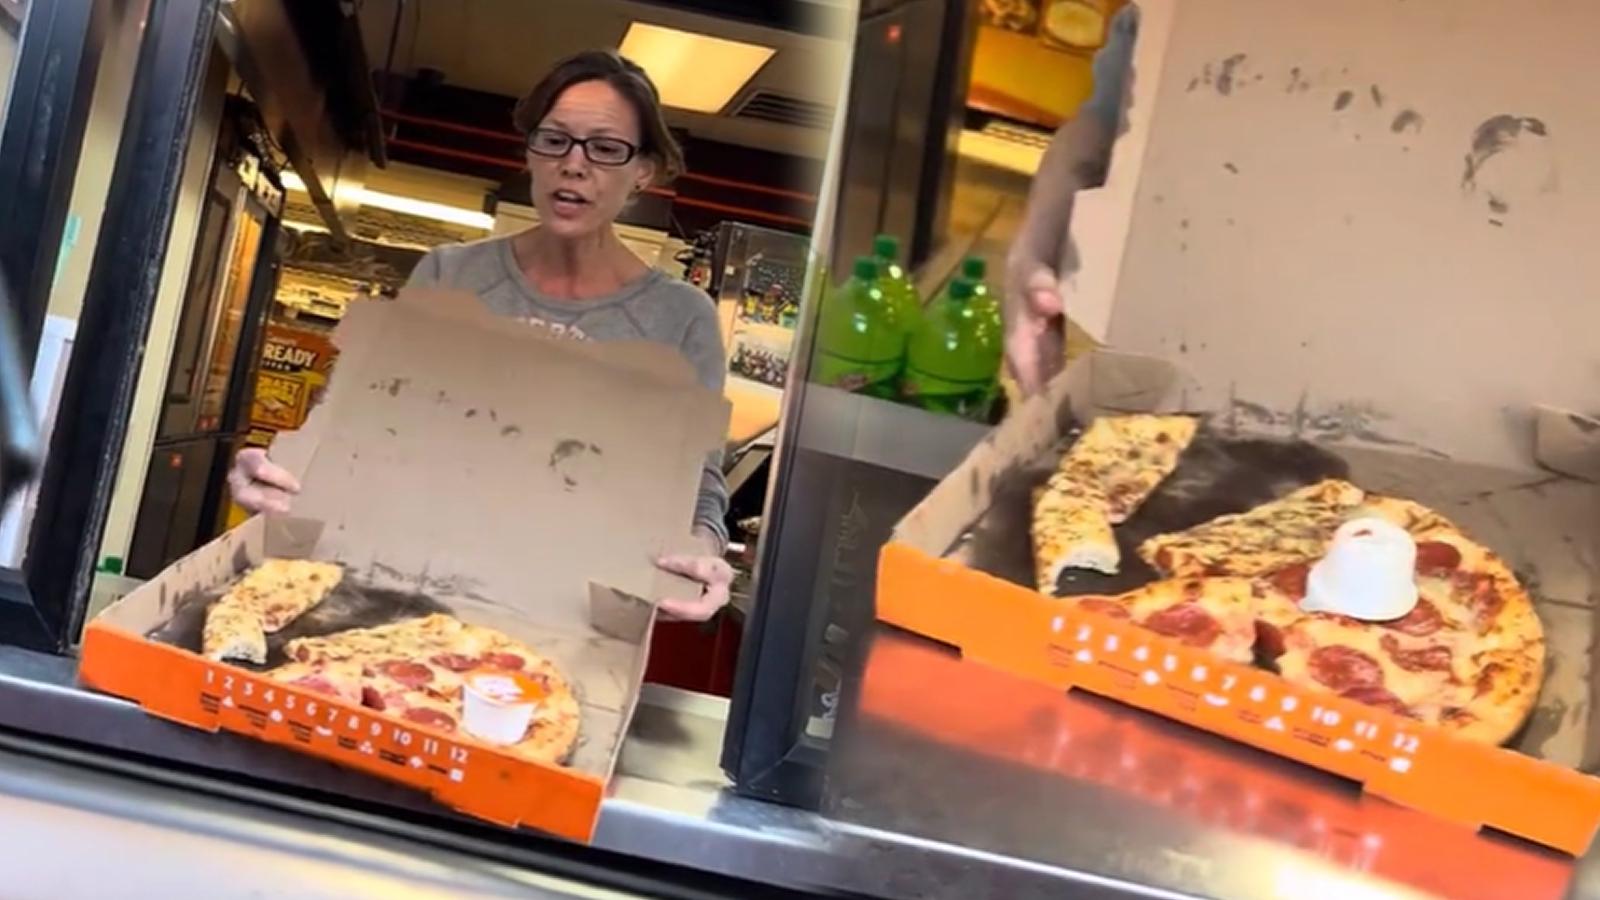 Little Caesars customer slammed after returning $7 pizza and getting roasted